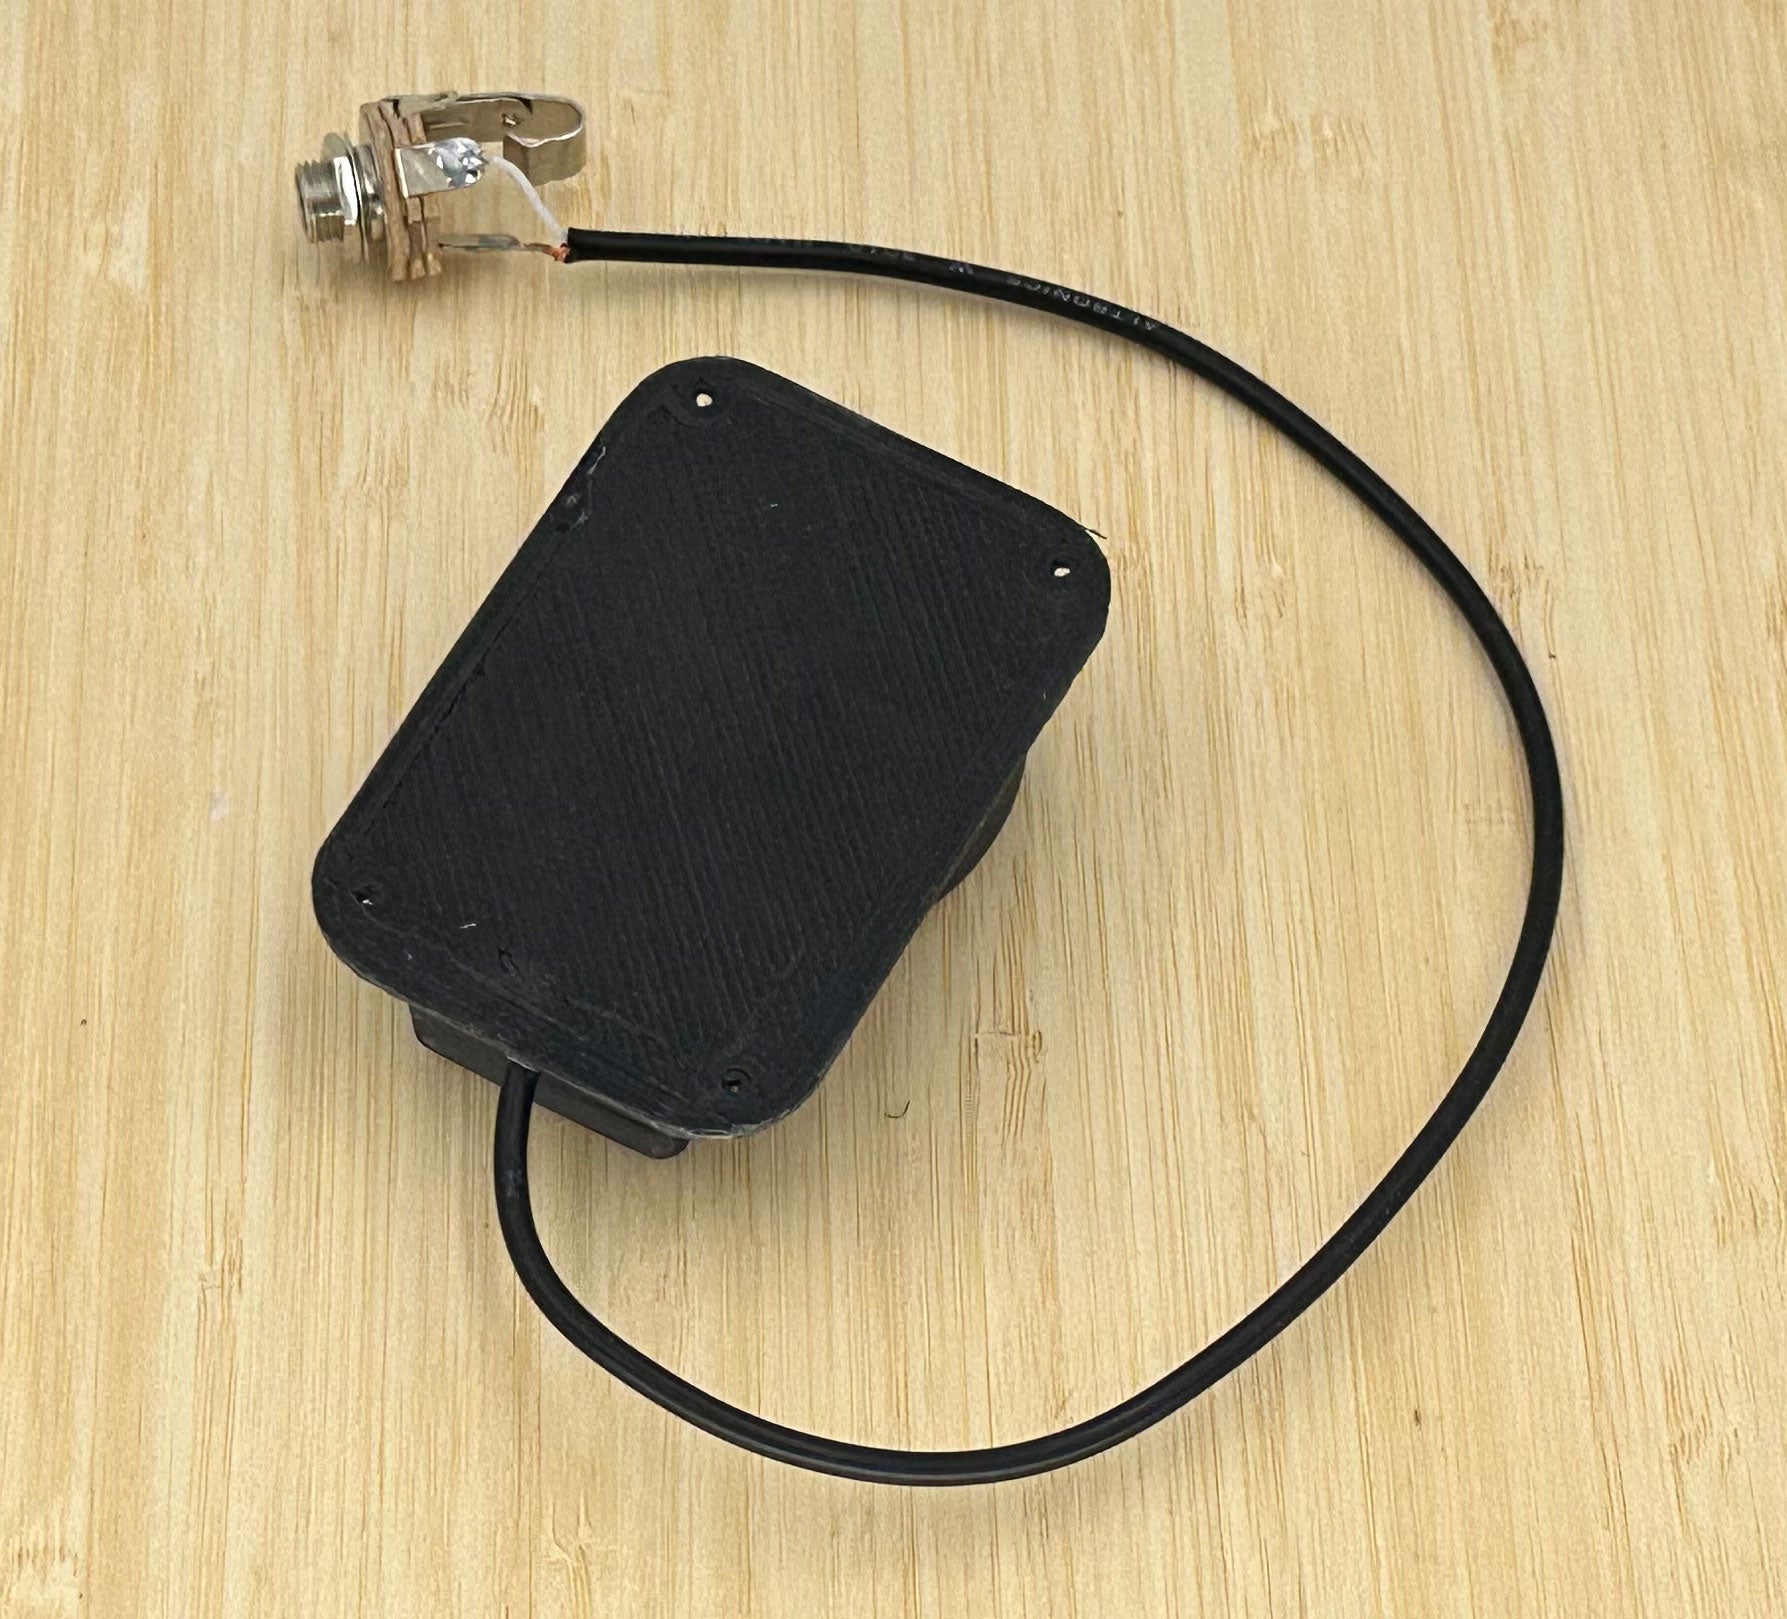 DIY pickup transducer for professional stomp box snare/shaker sound - Peterman Acoustic diy